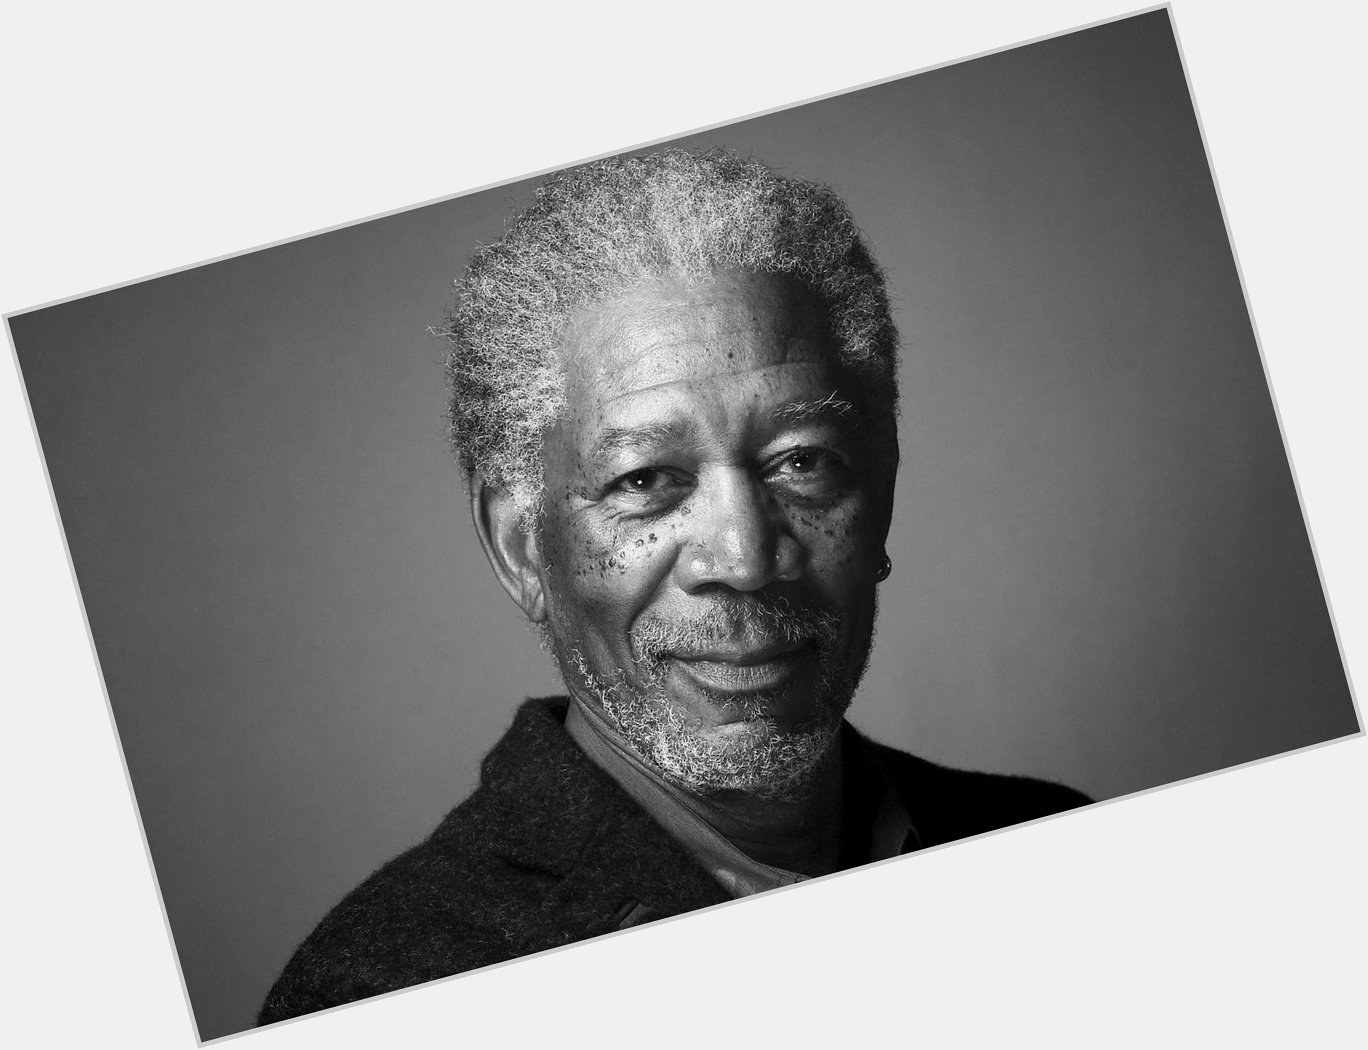 \"Challenge yourself; it s the only path which leads to growth.\"
Happy 80th Birthday to acting legend Morgan Freeman! 